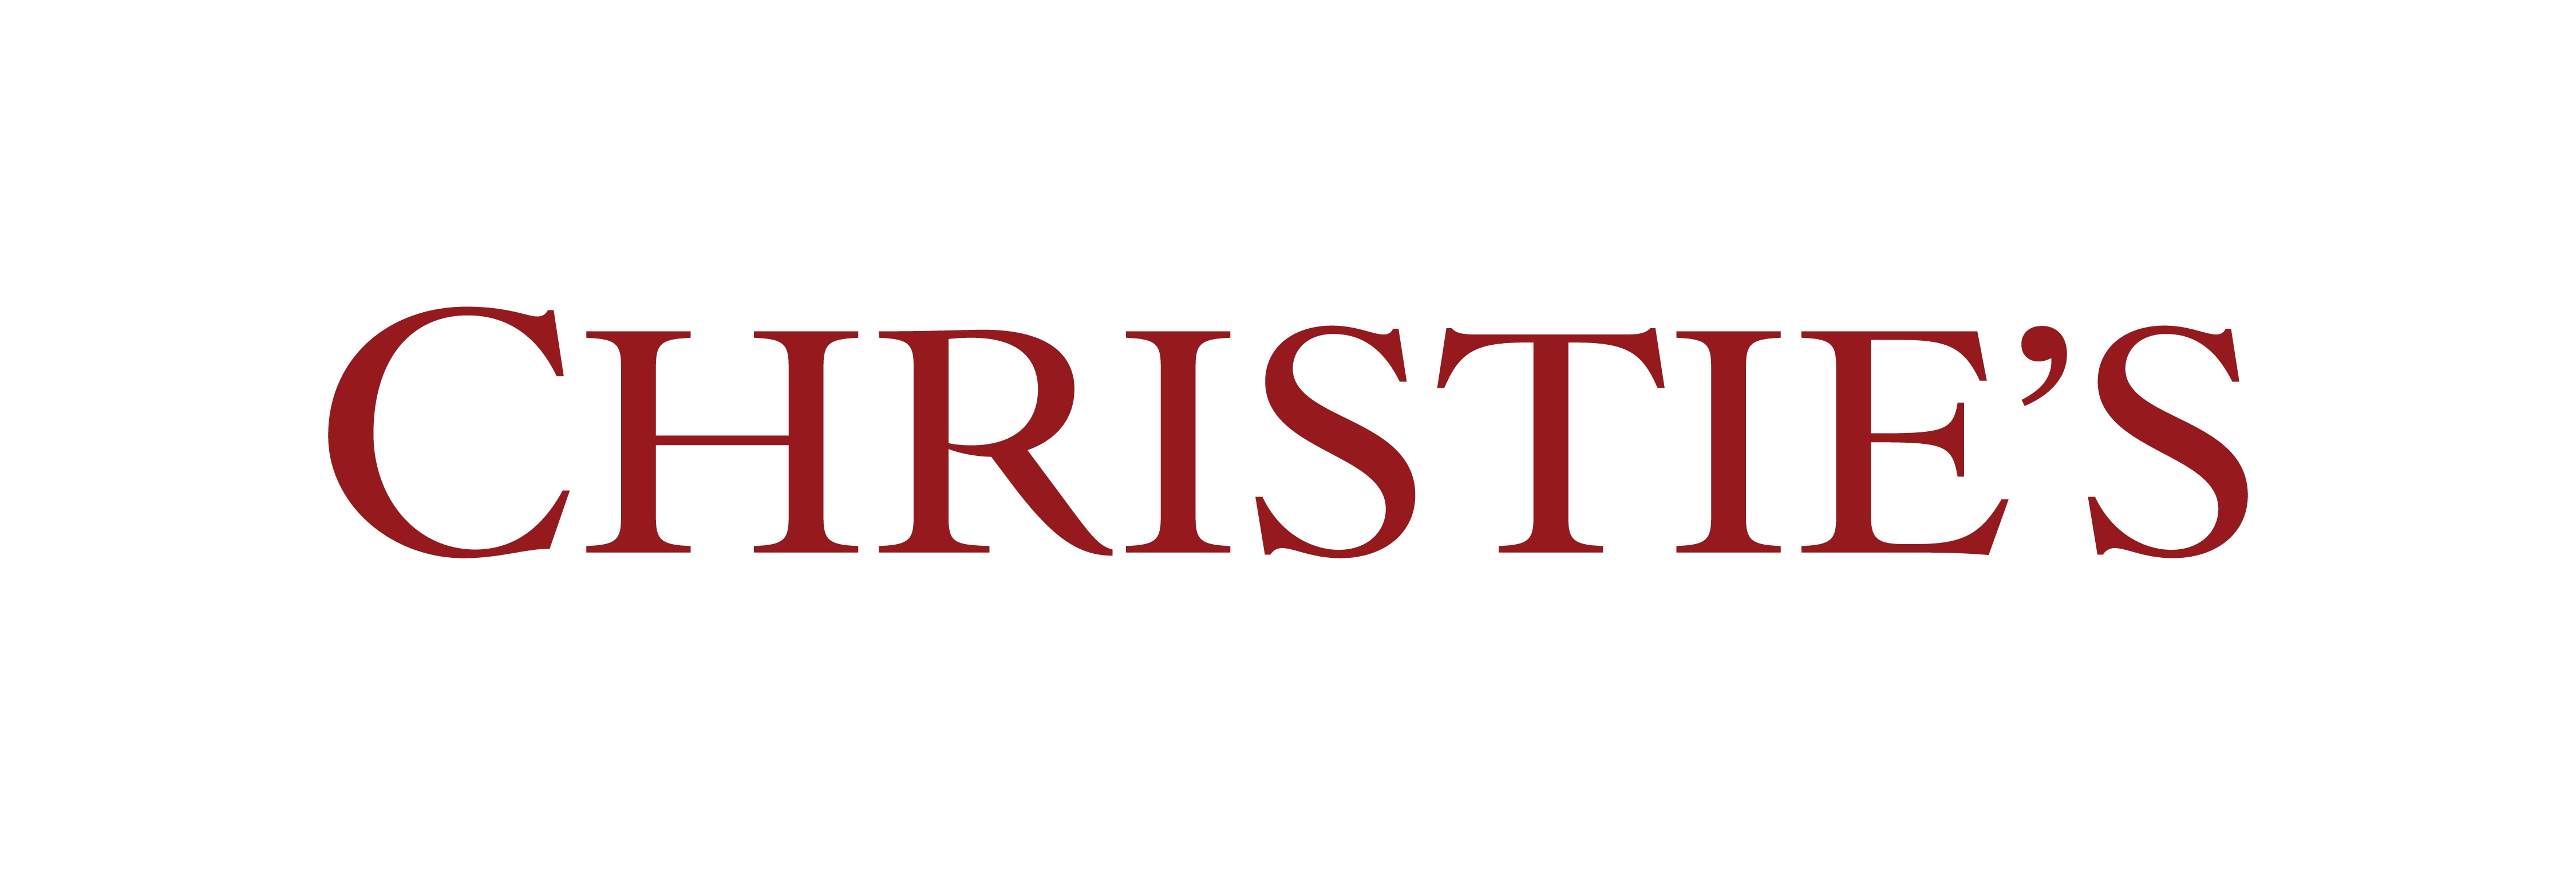 Logo of Christies auction house